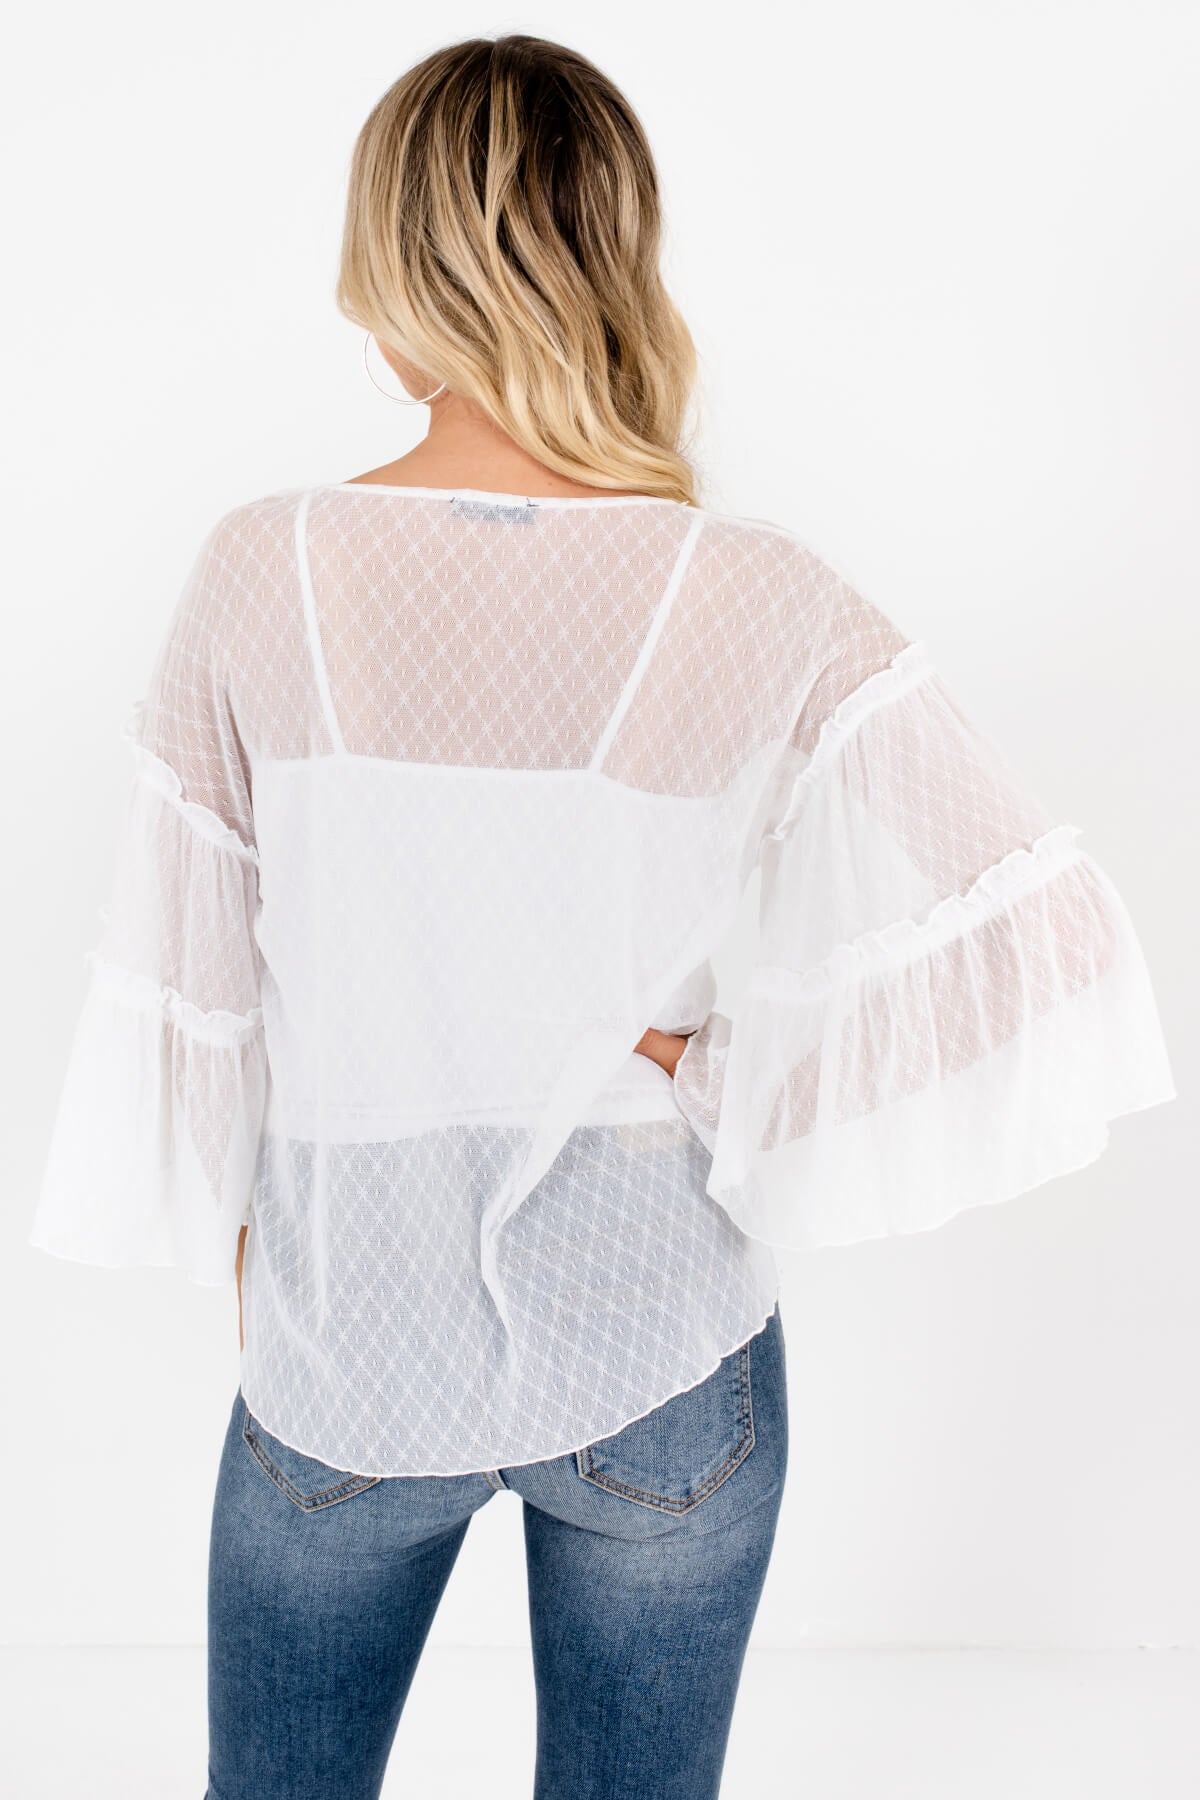 White Sheer Mesh Daisy Tops Affordable Online Boutique